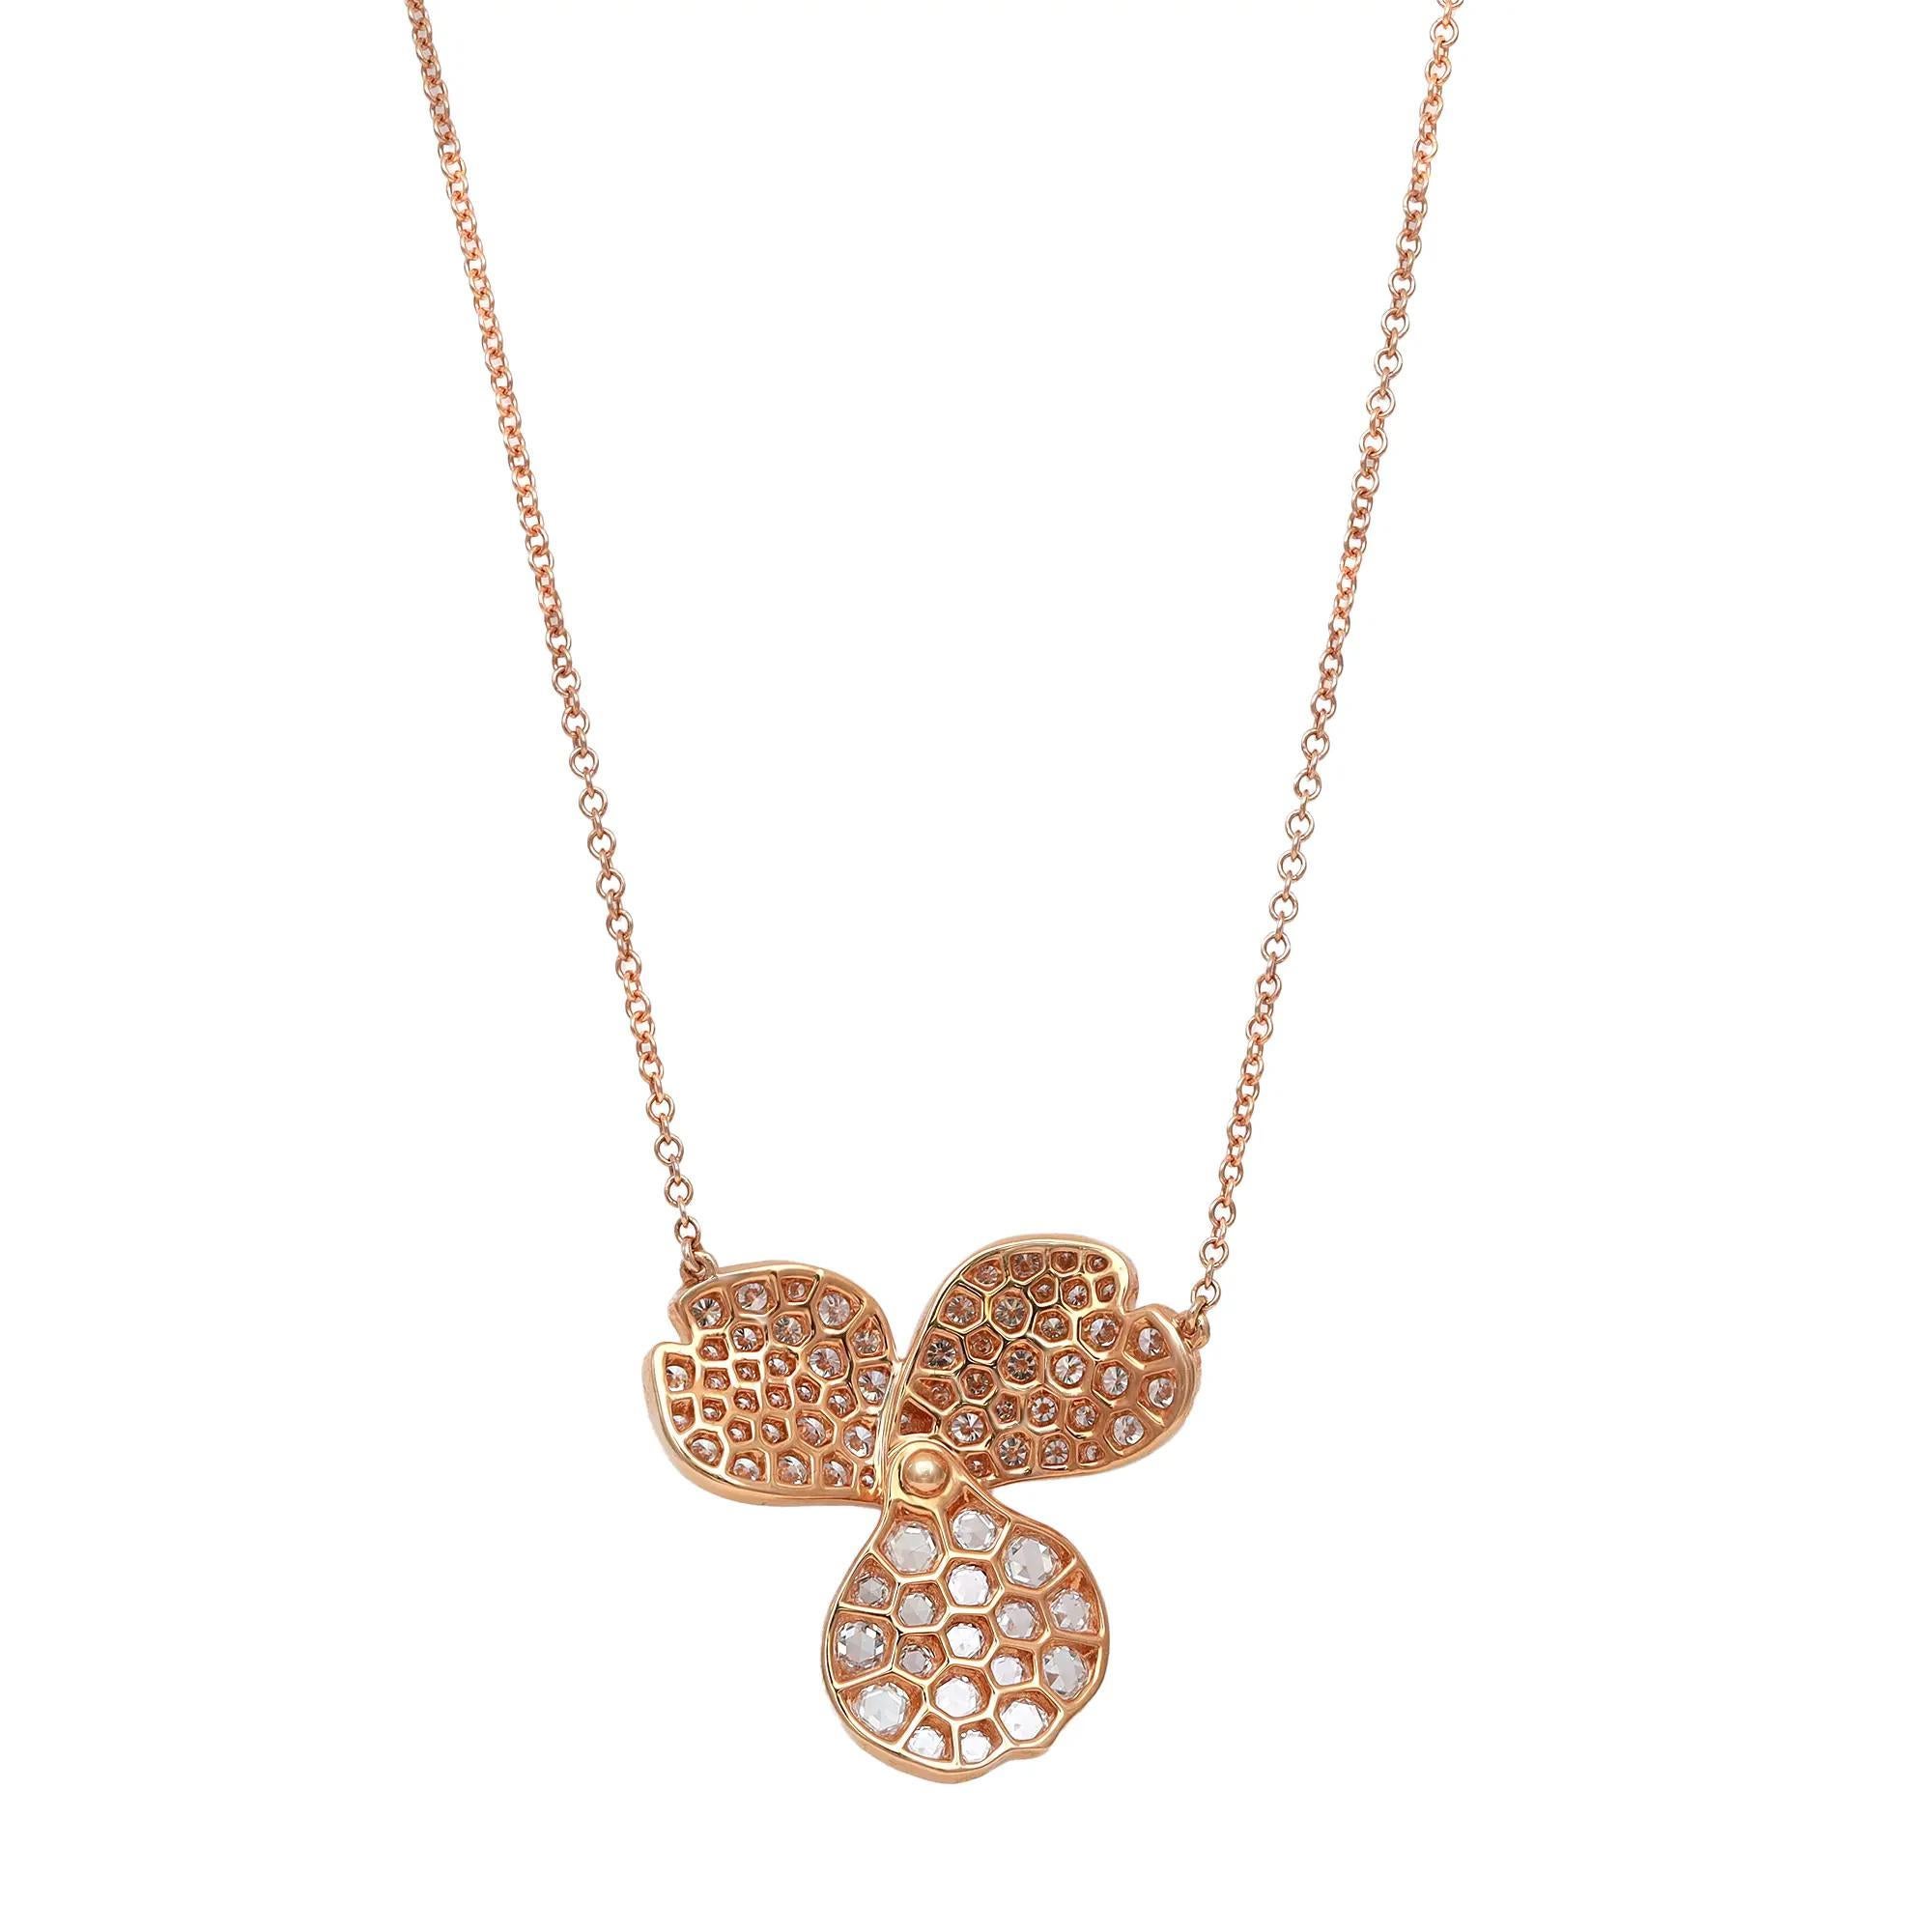 Fall in love with this beautiful Tiffany & Co. Diamond Pave Large Paper Flowers Pendant Necklace. Crafted in 18K rose gold. Showcasing a gorgeous three petal flower studded with round brilliant cut and round rose cut diamonds attached to a cuban